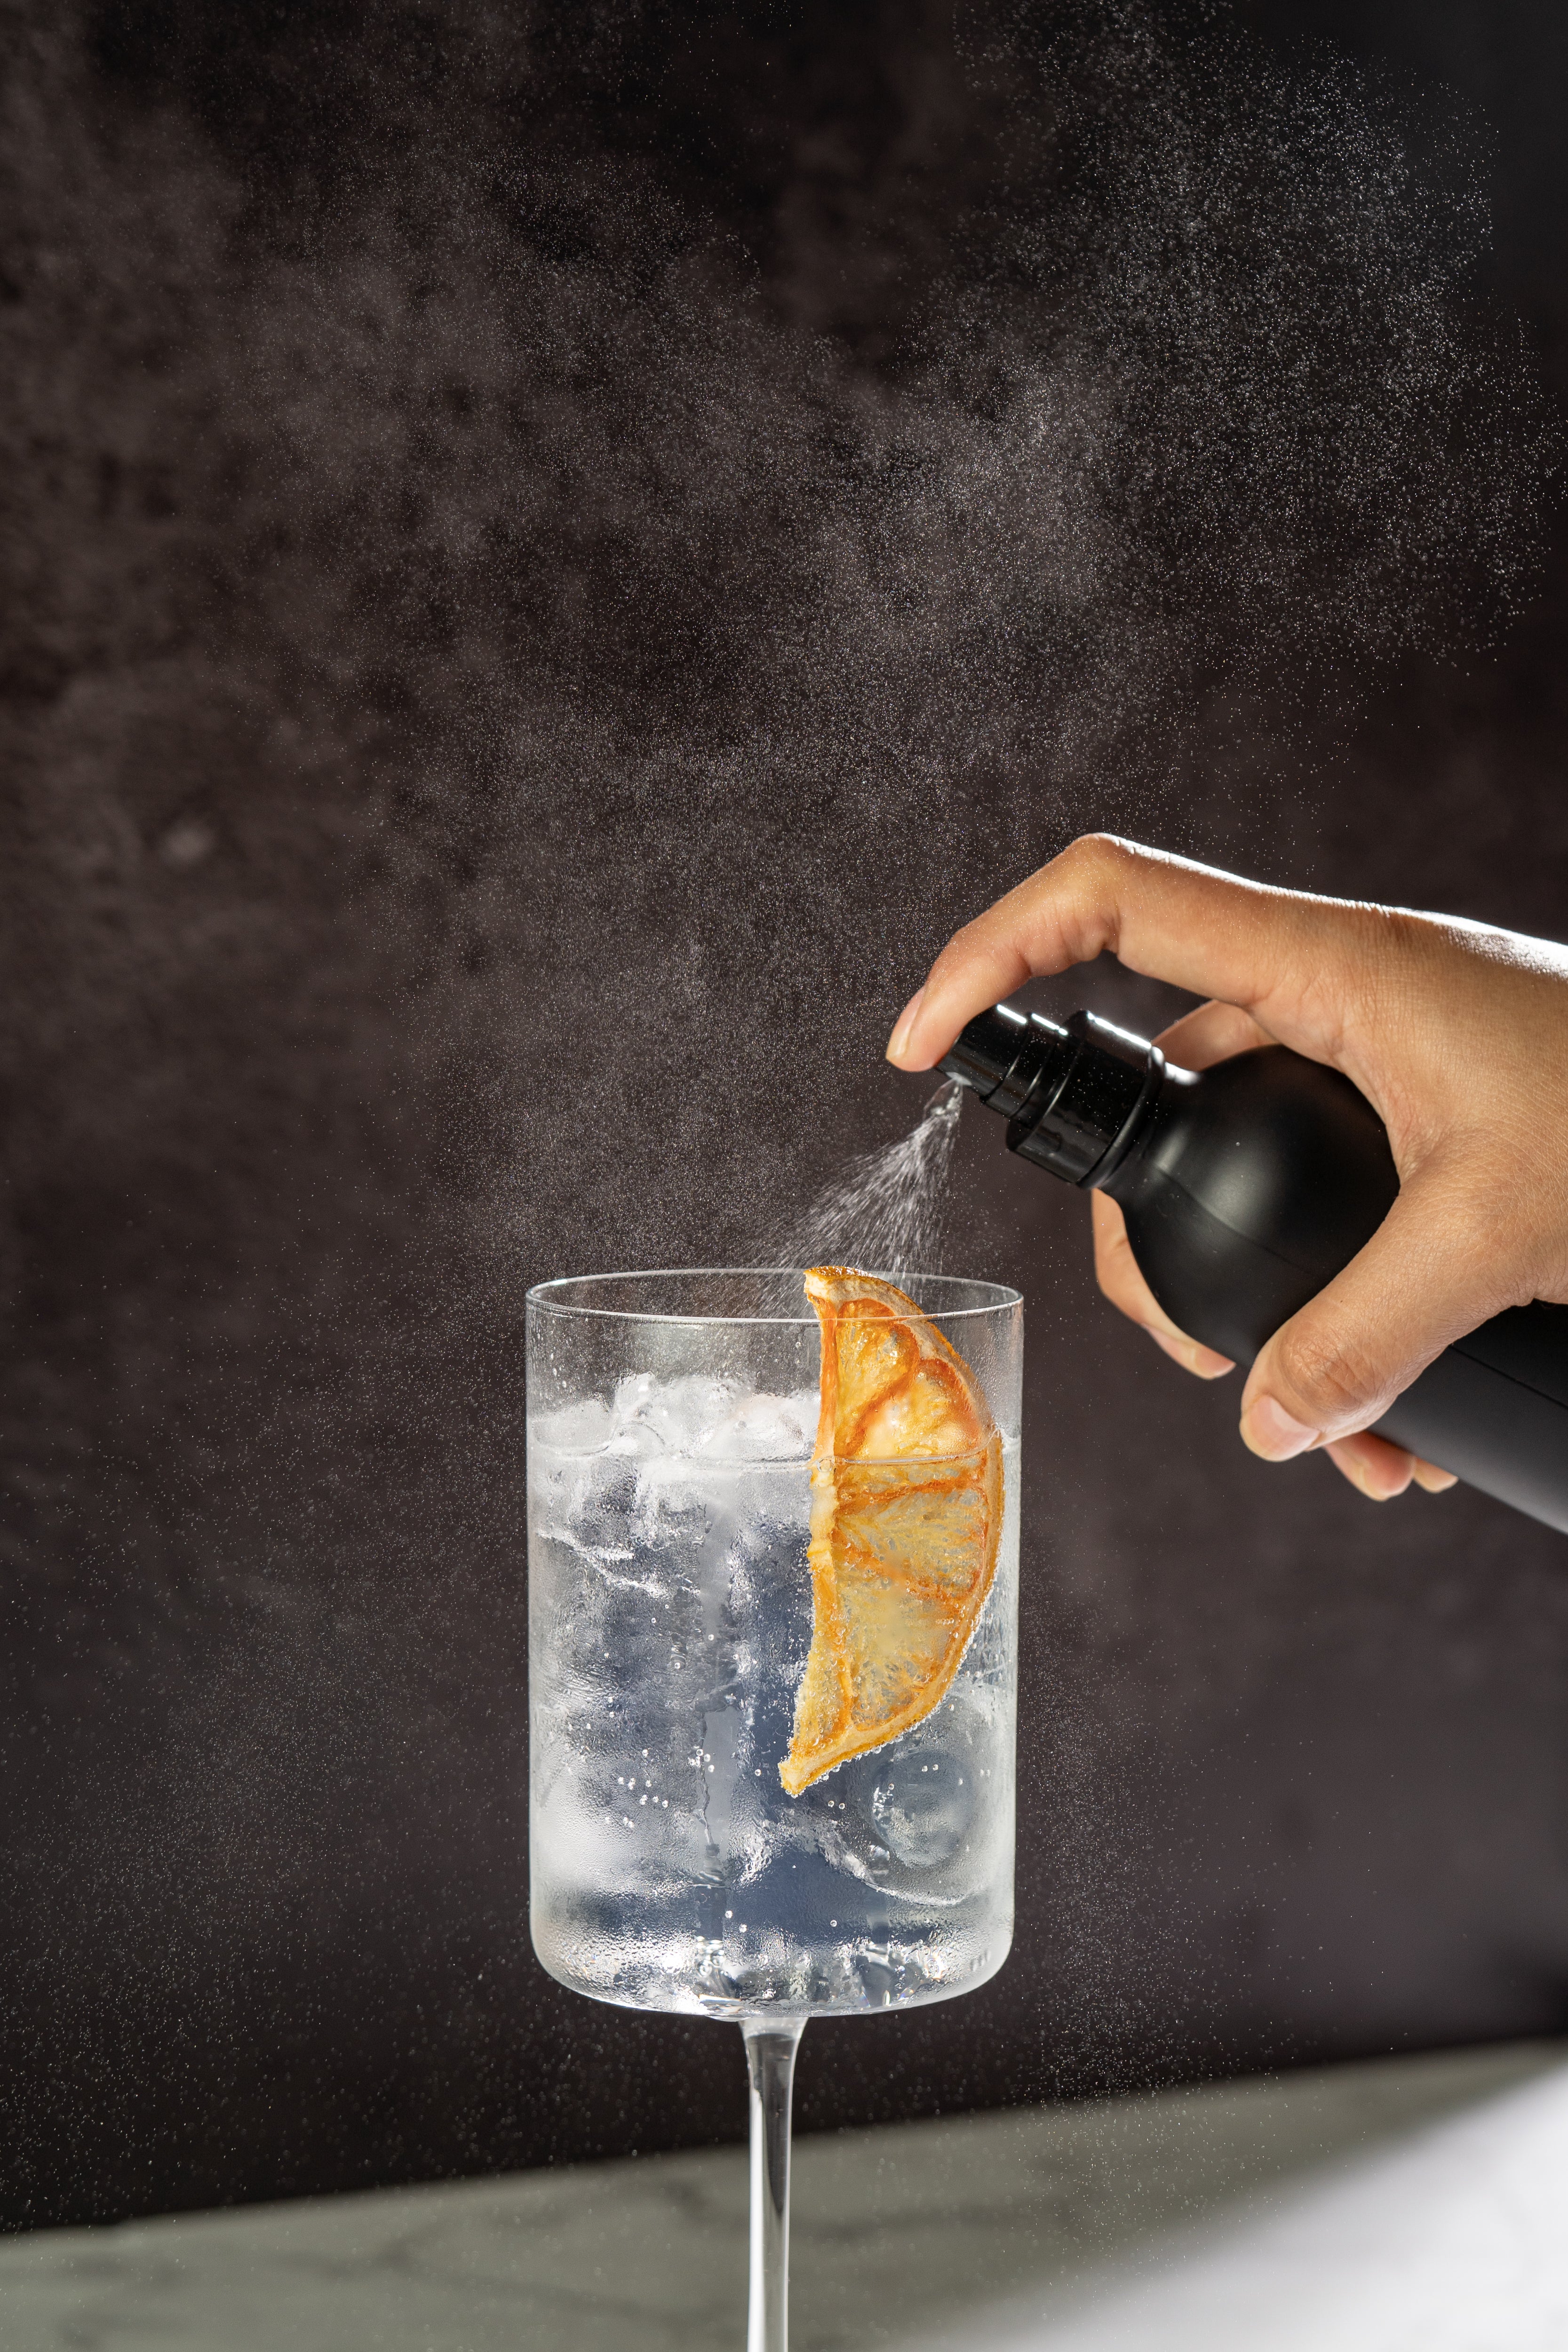 Hand spraying clear liquid from a black atomizer bottle into a tall square wine glass with clear liquid, ice, and dried orange garnish